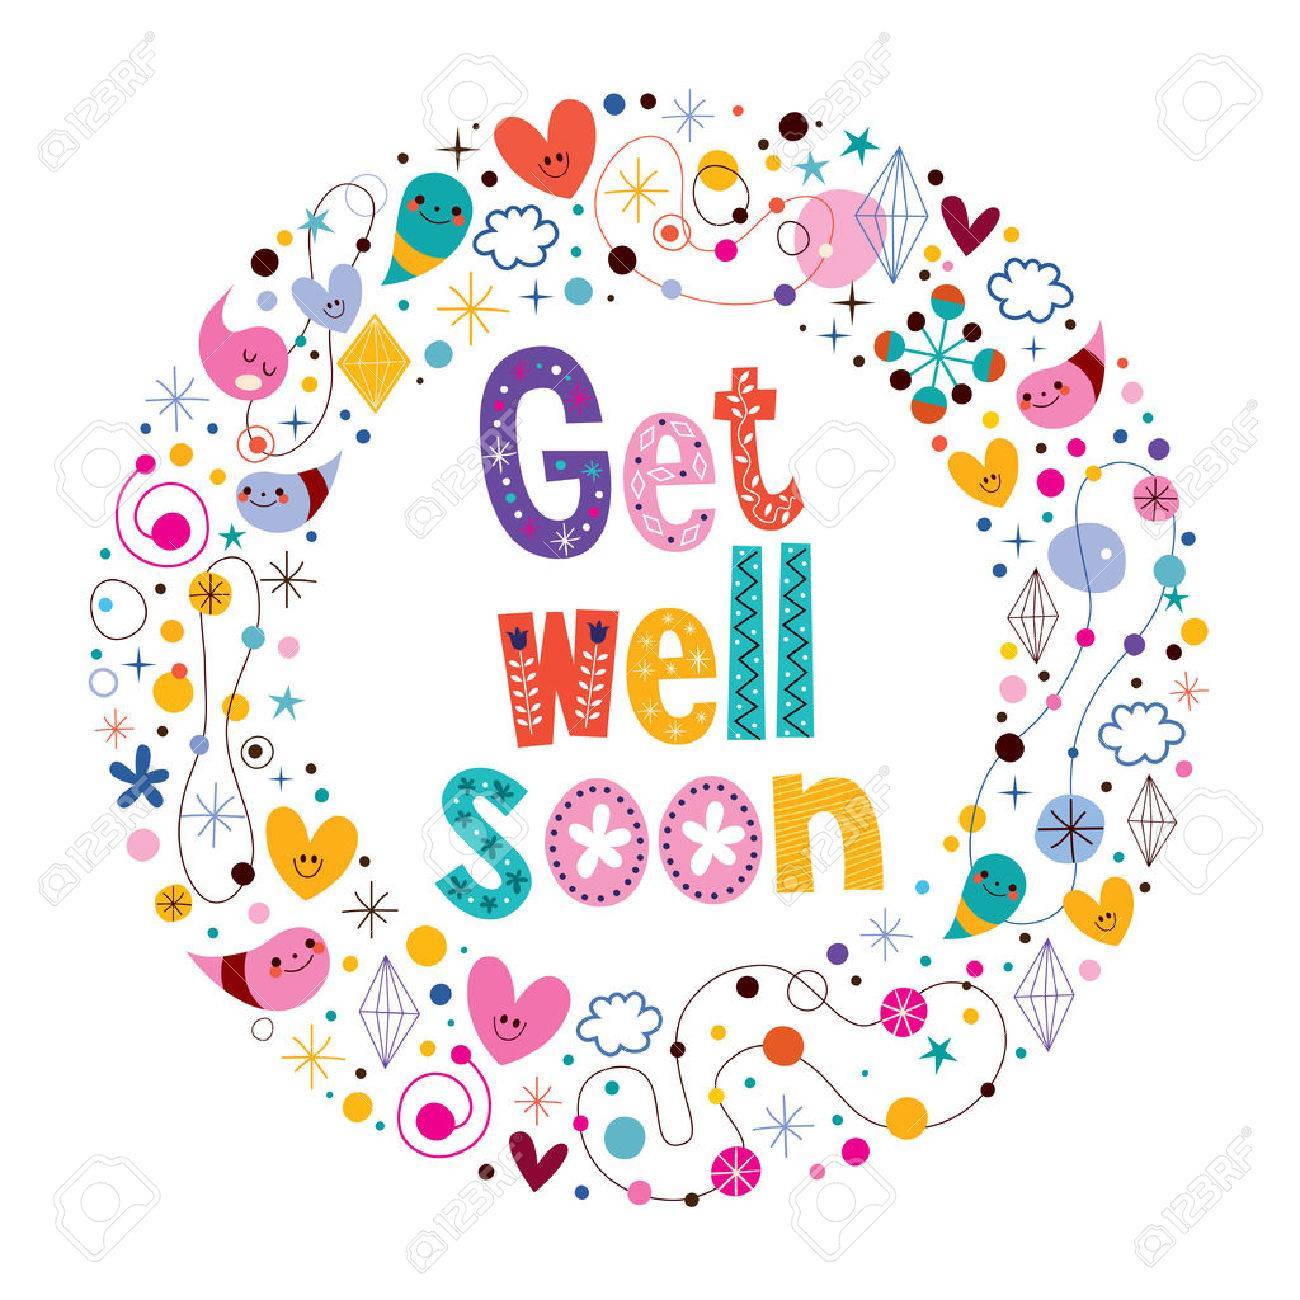 Free clipart images get well soon 5 » Clipart Portal.